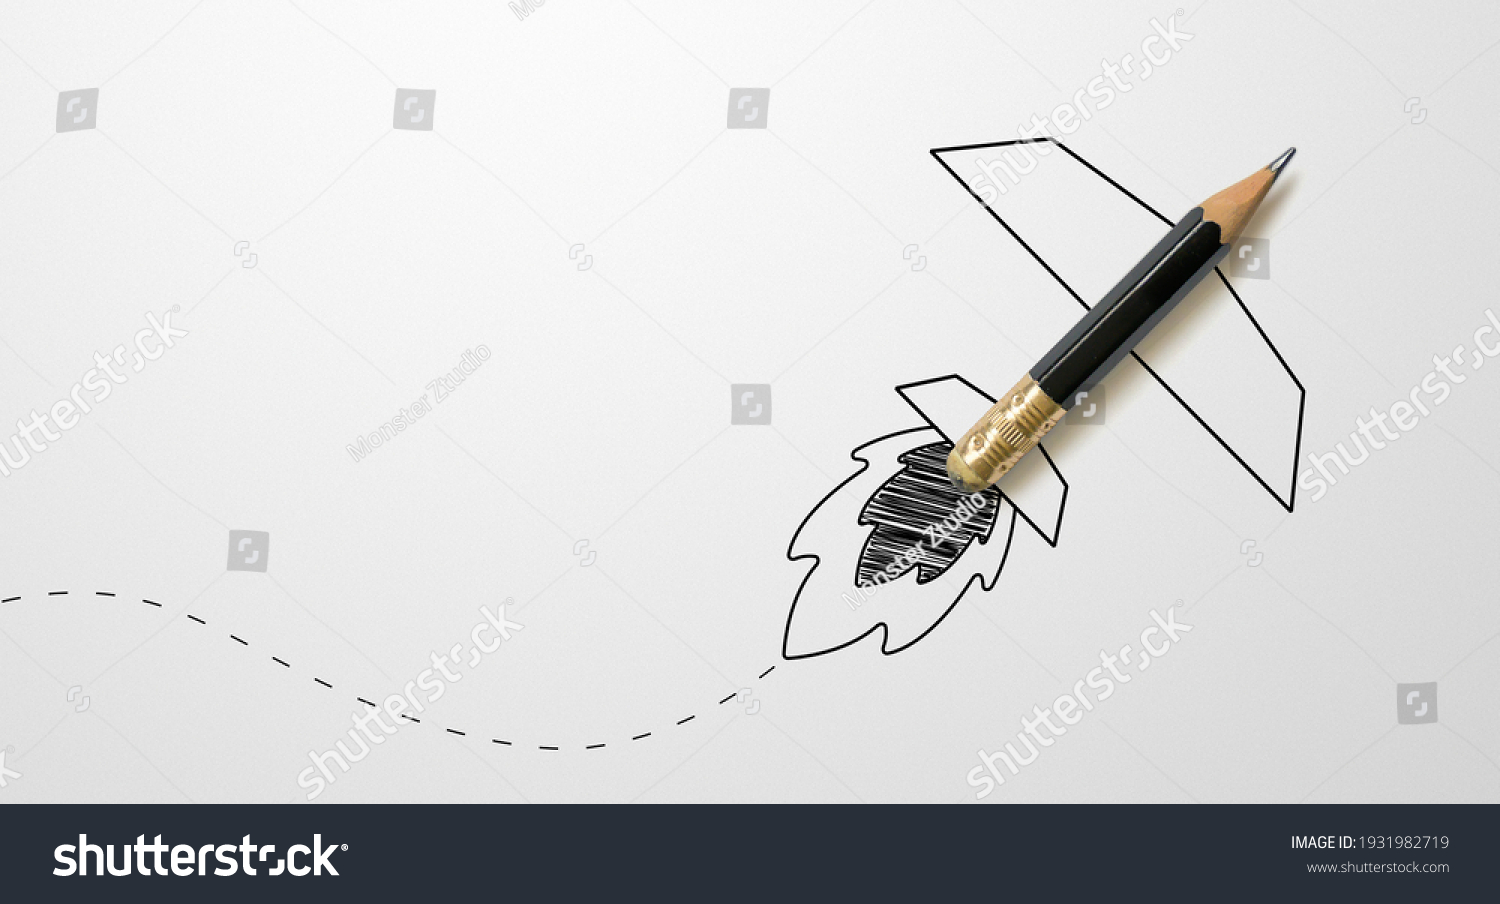 Black colour pencil with outline rocket on white paper background. Creativity inspiration ideas concept #1931982719